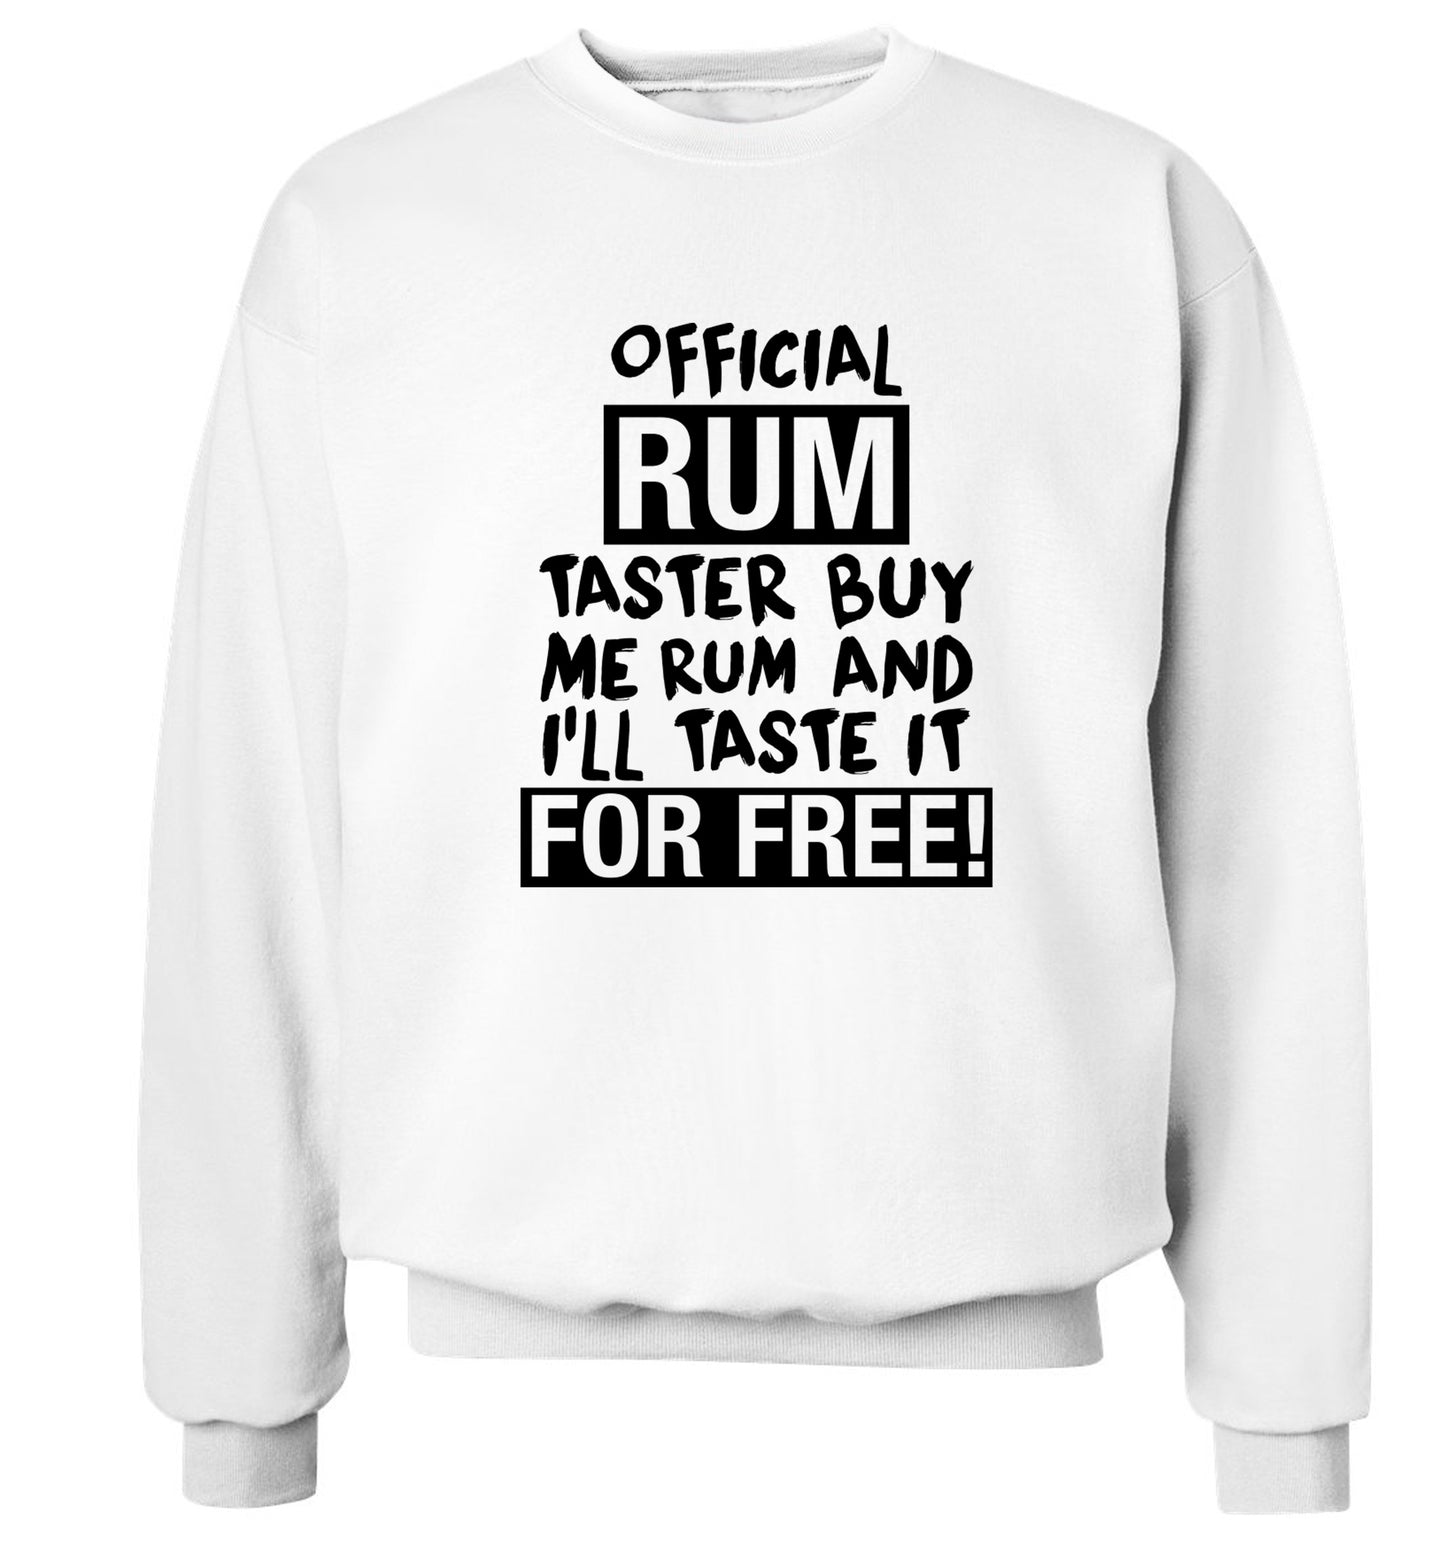 Official rum taster buy me rum and I'll taste it for free Adult's unisex white Sweater 2XL